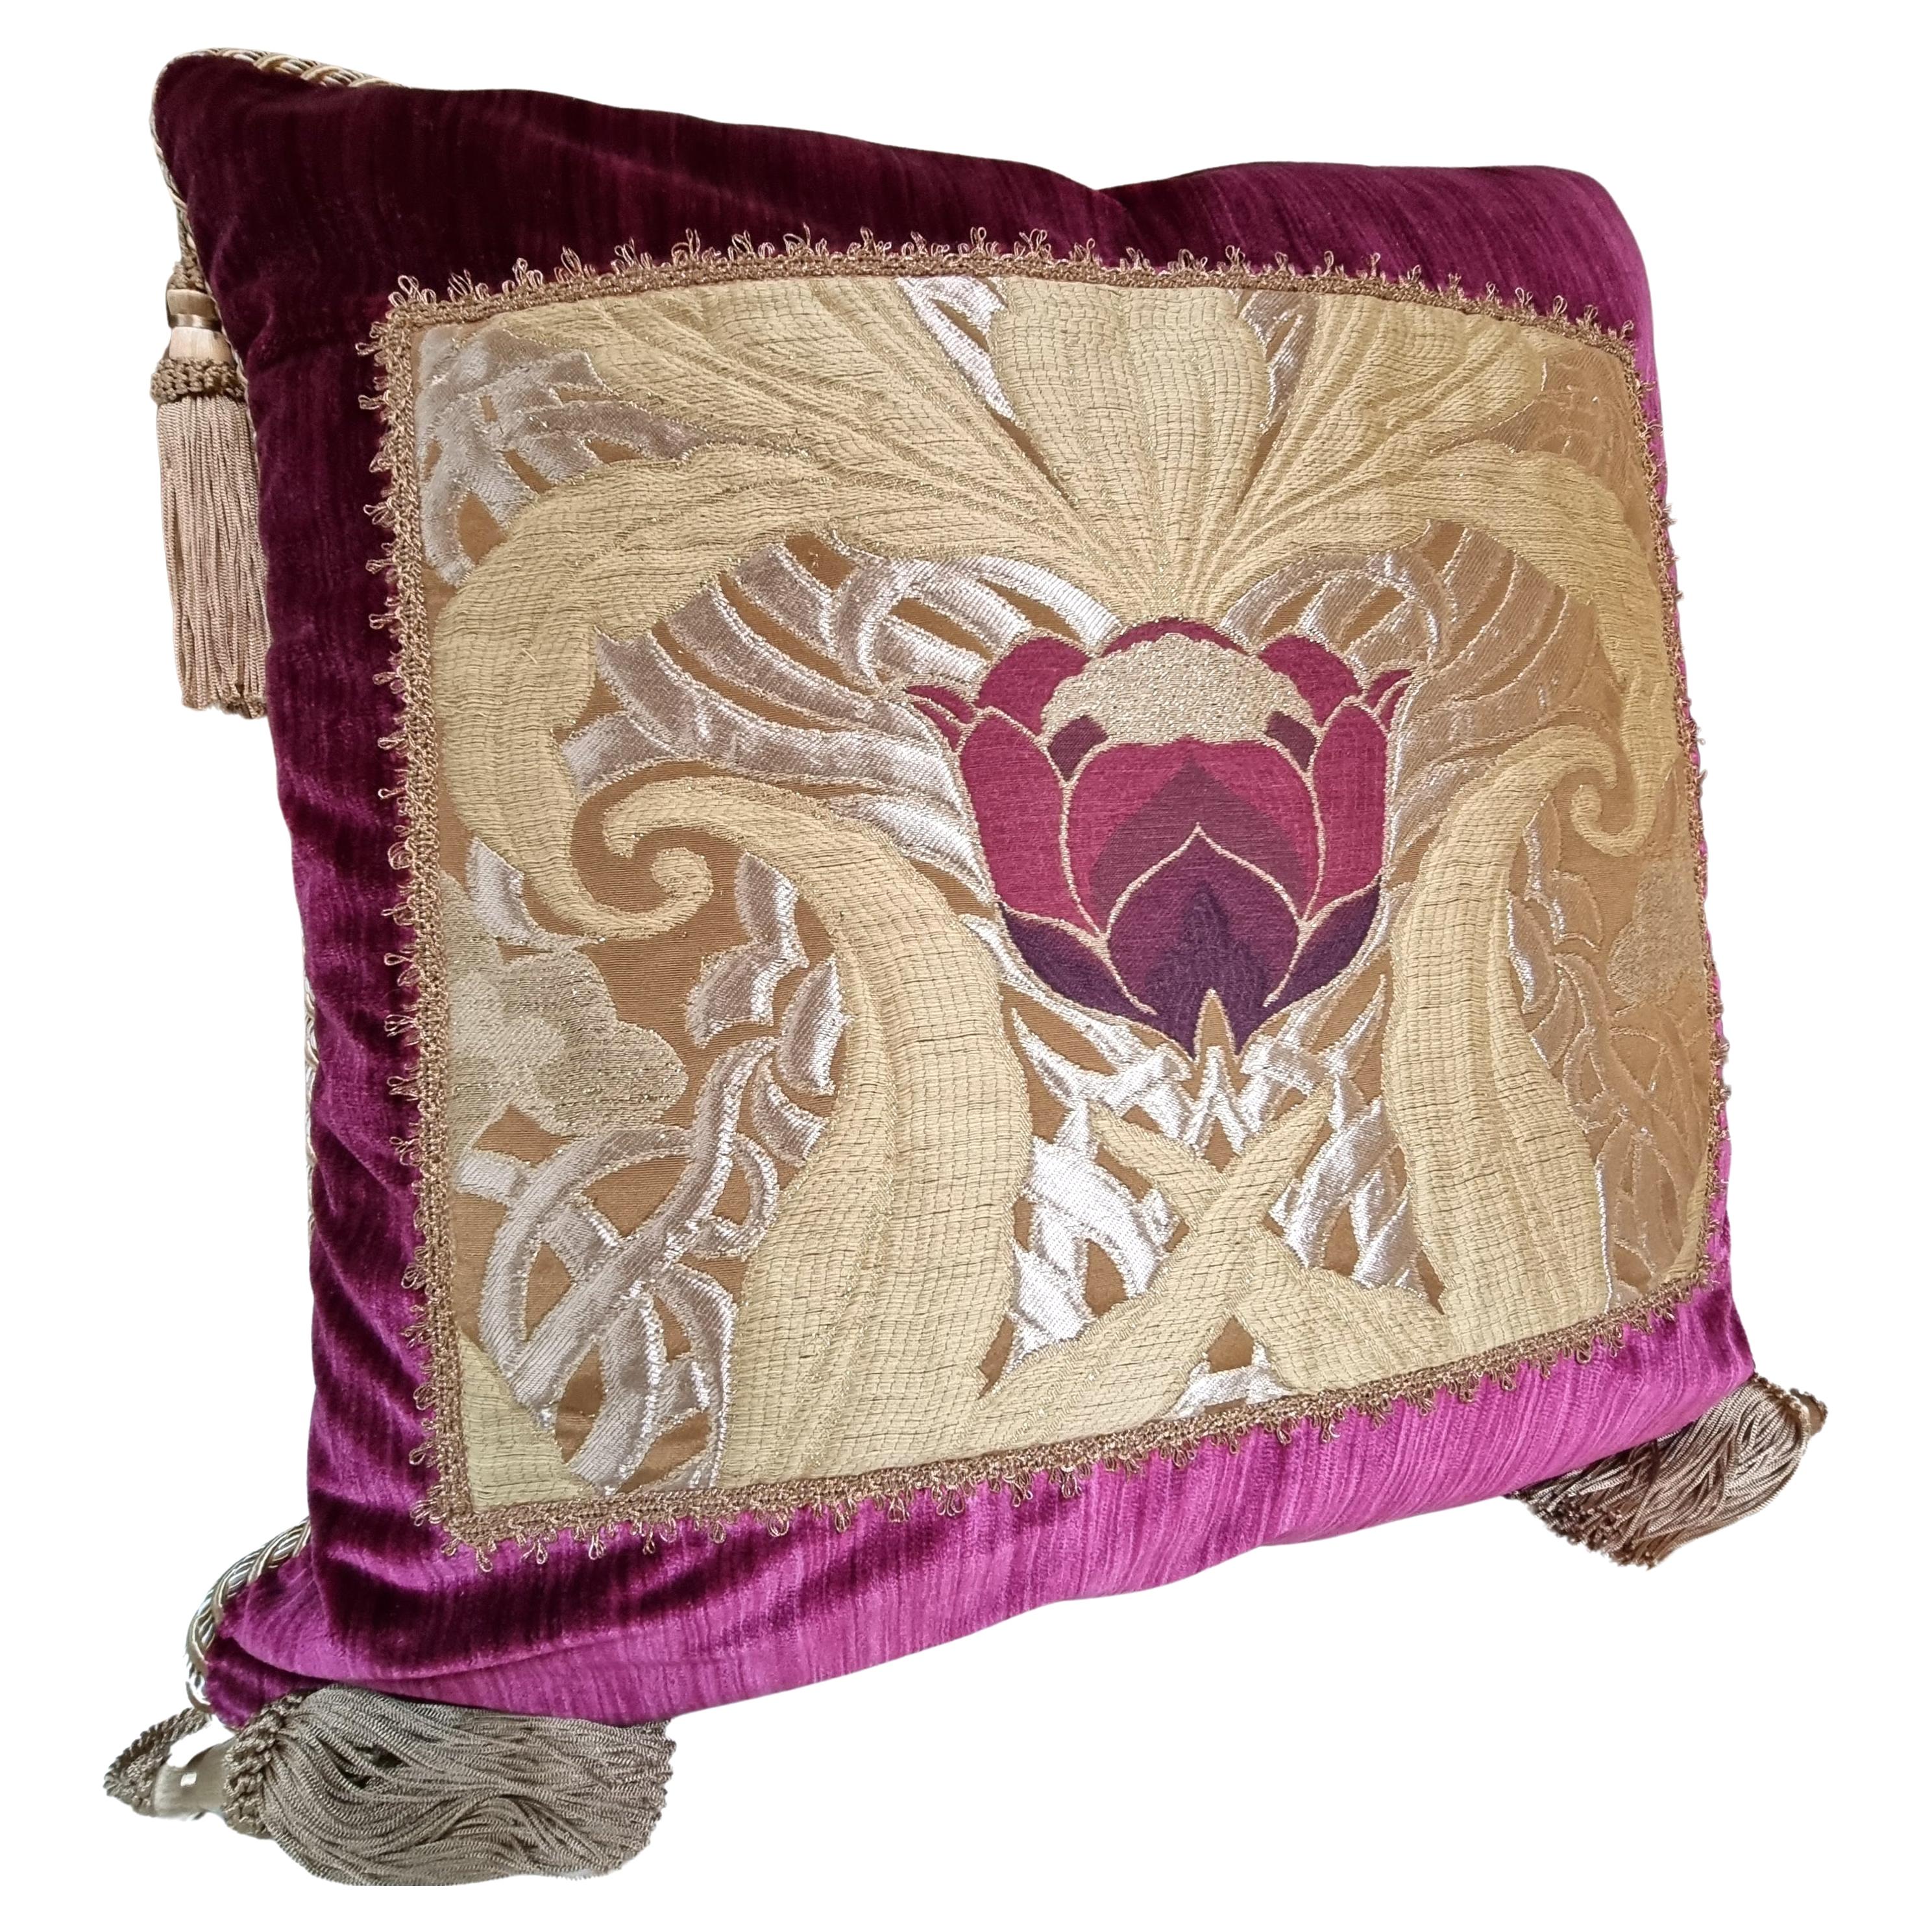 This amazing decorative throw pillow with beige tassel at the four corners is handmade using Rubelli strie silk velvet in amethyst color on both sides finished with Houlès multicolor twisted lip cord, embellished with front positioned panel in Luigi